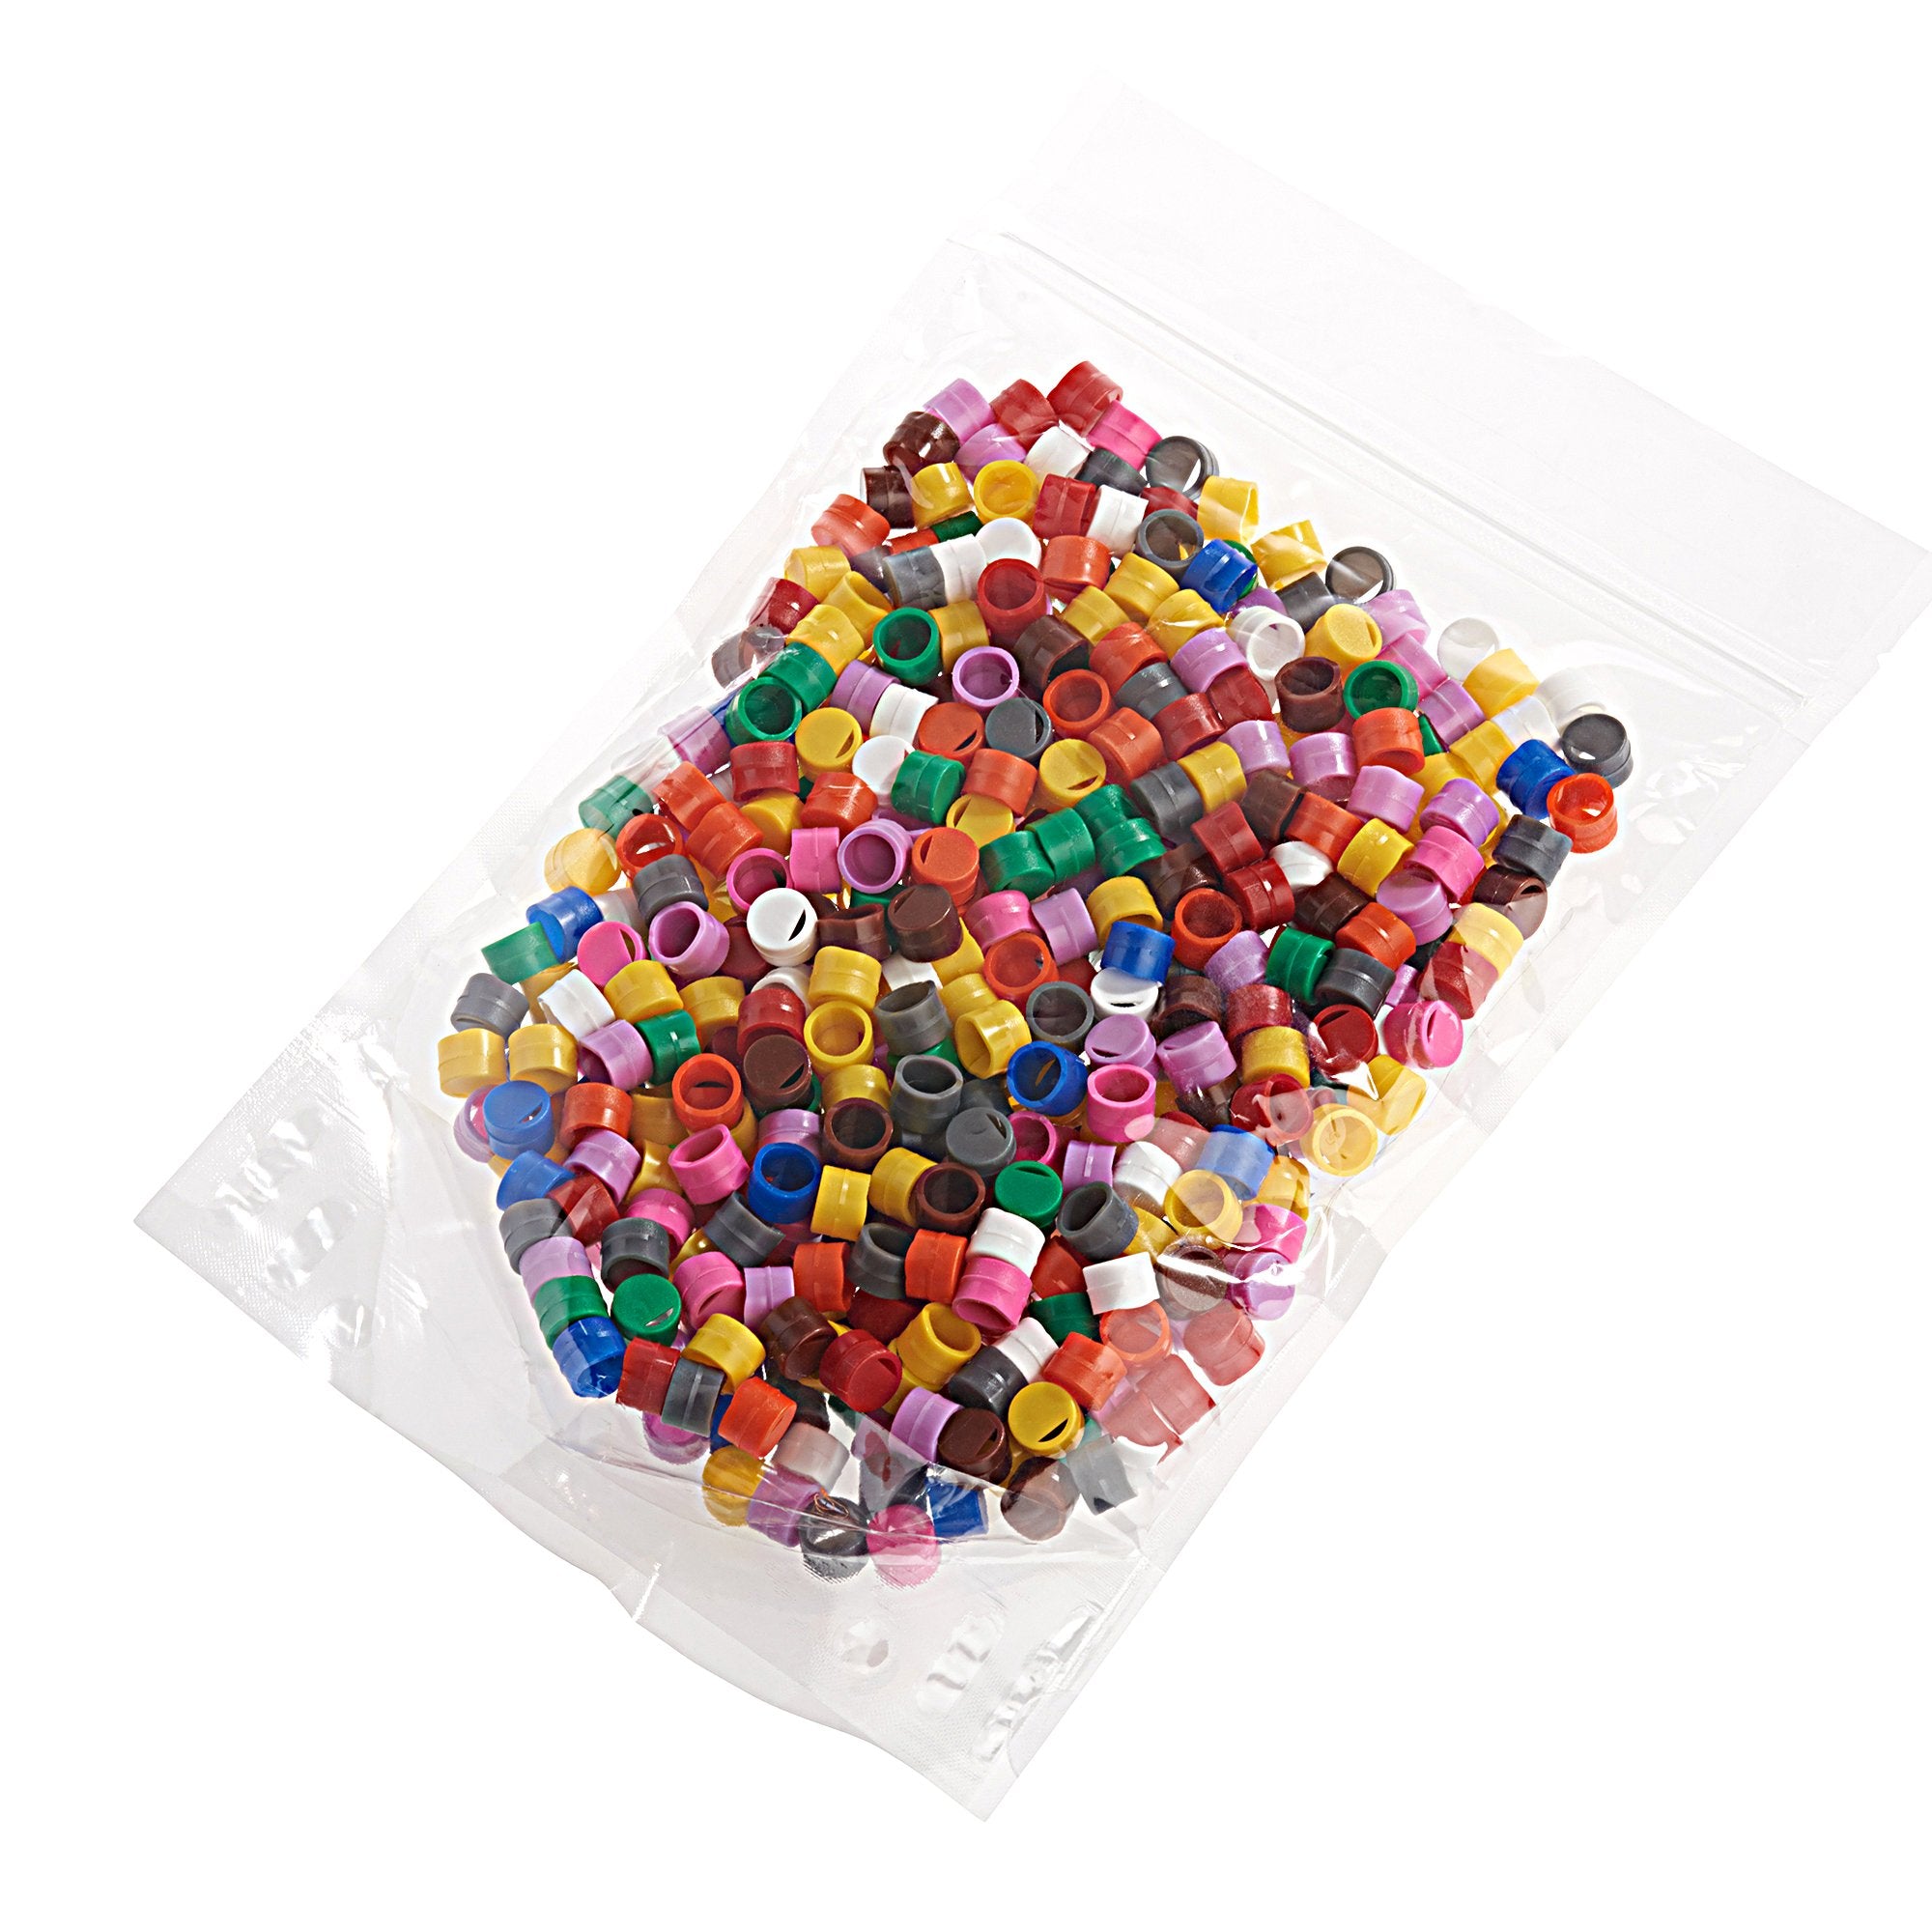 Celltreat 229940 Assorted Color Cap Insert for CF Cryogenic Vials, Non-sterile